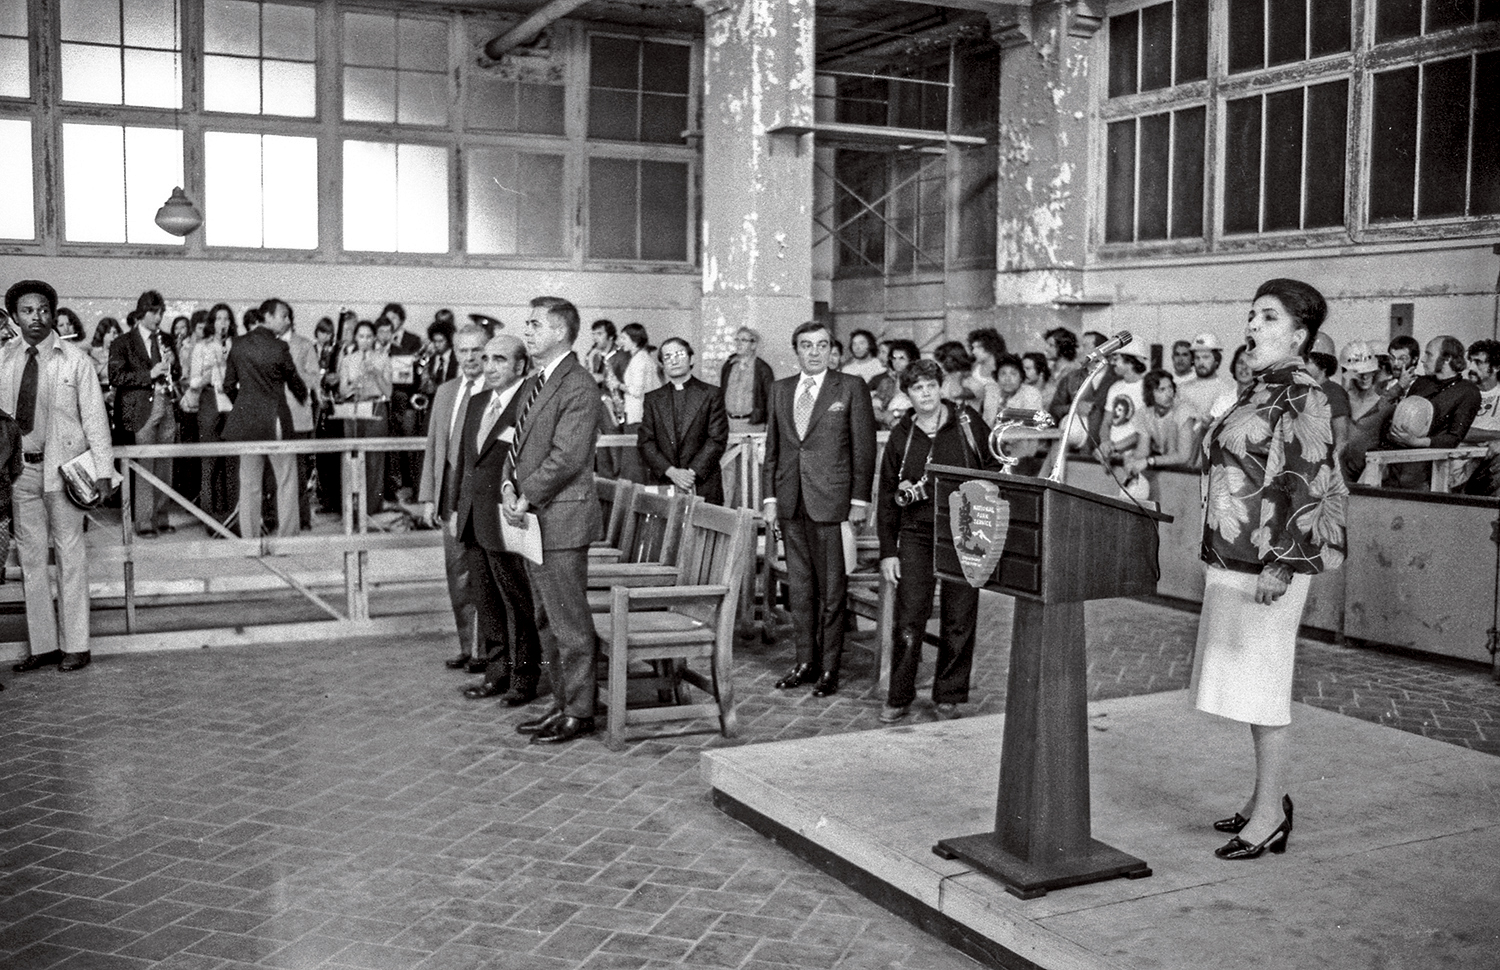 A woman stands singing at a podium in Ellis Island.